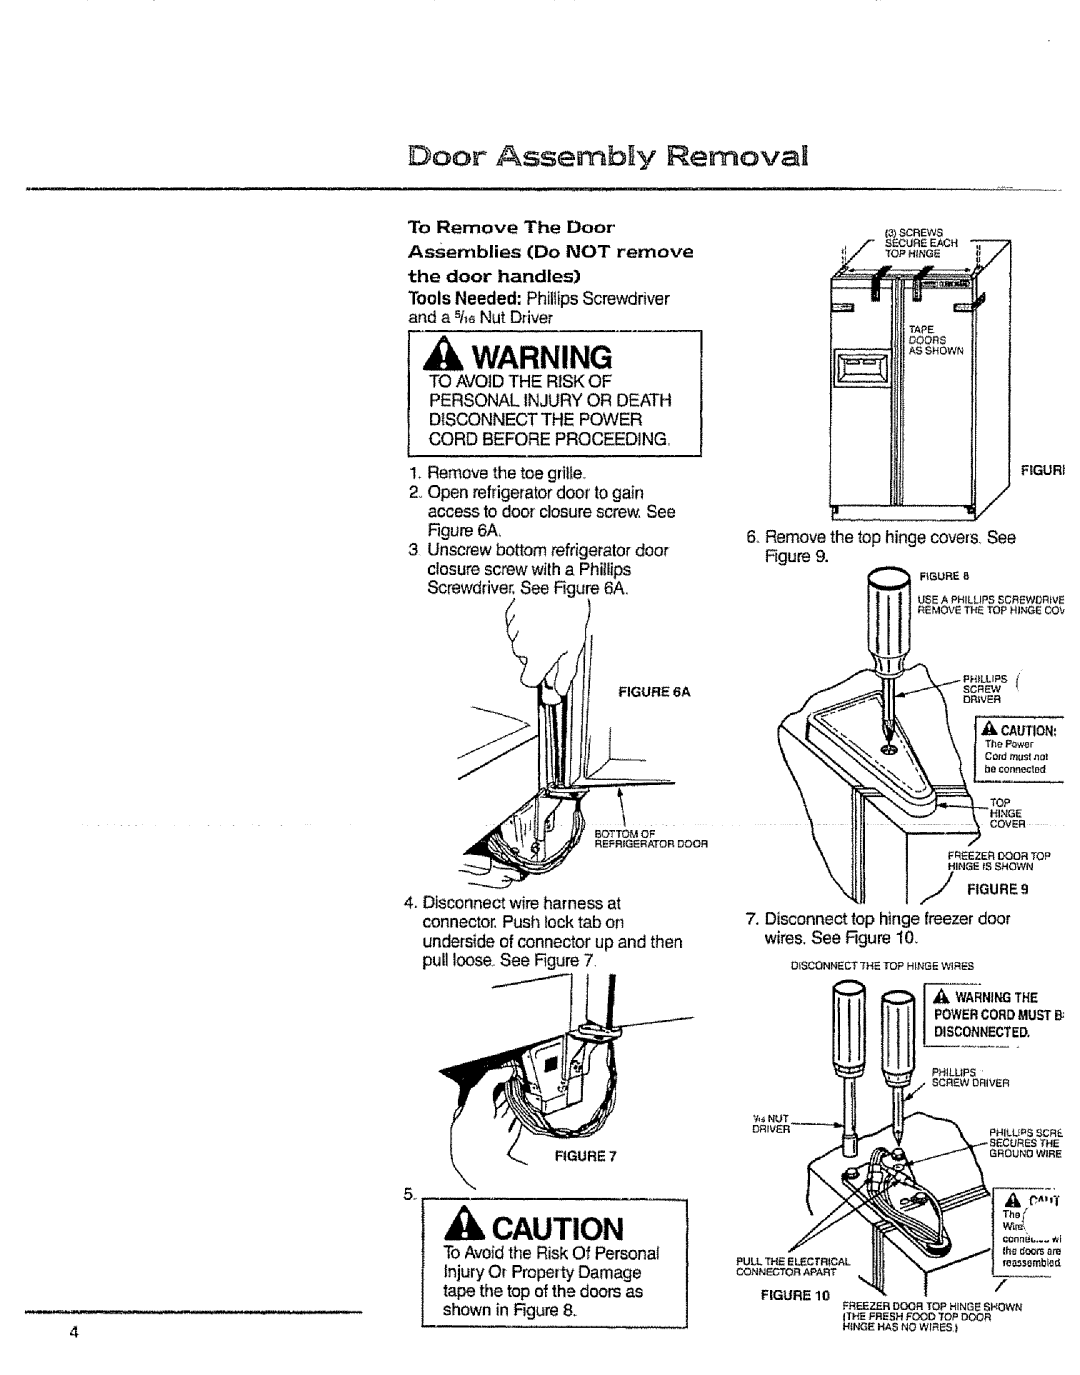 Sears 10062603 manual Door AssemblIy Removal, To Remove The Door Assemblies Do NOT remove, the door handles 